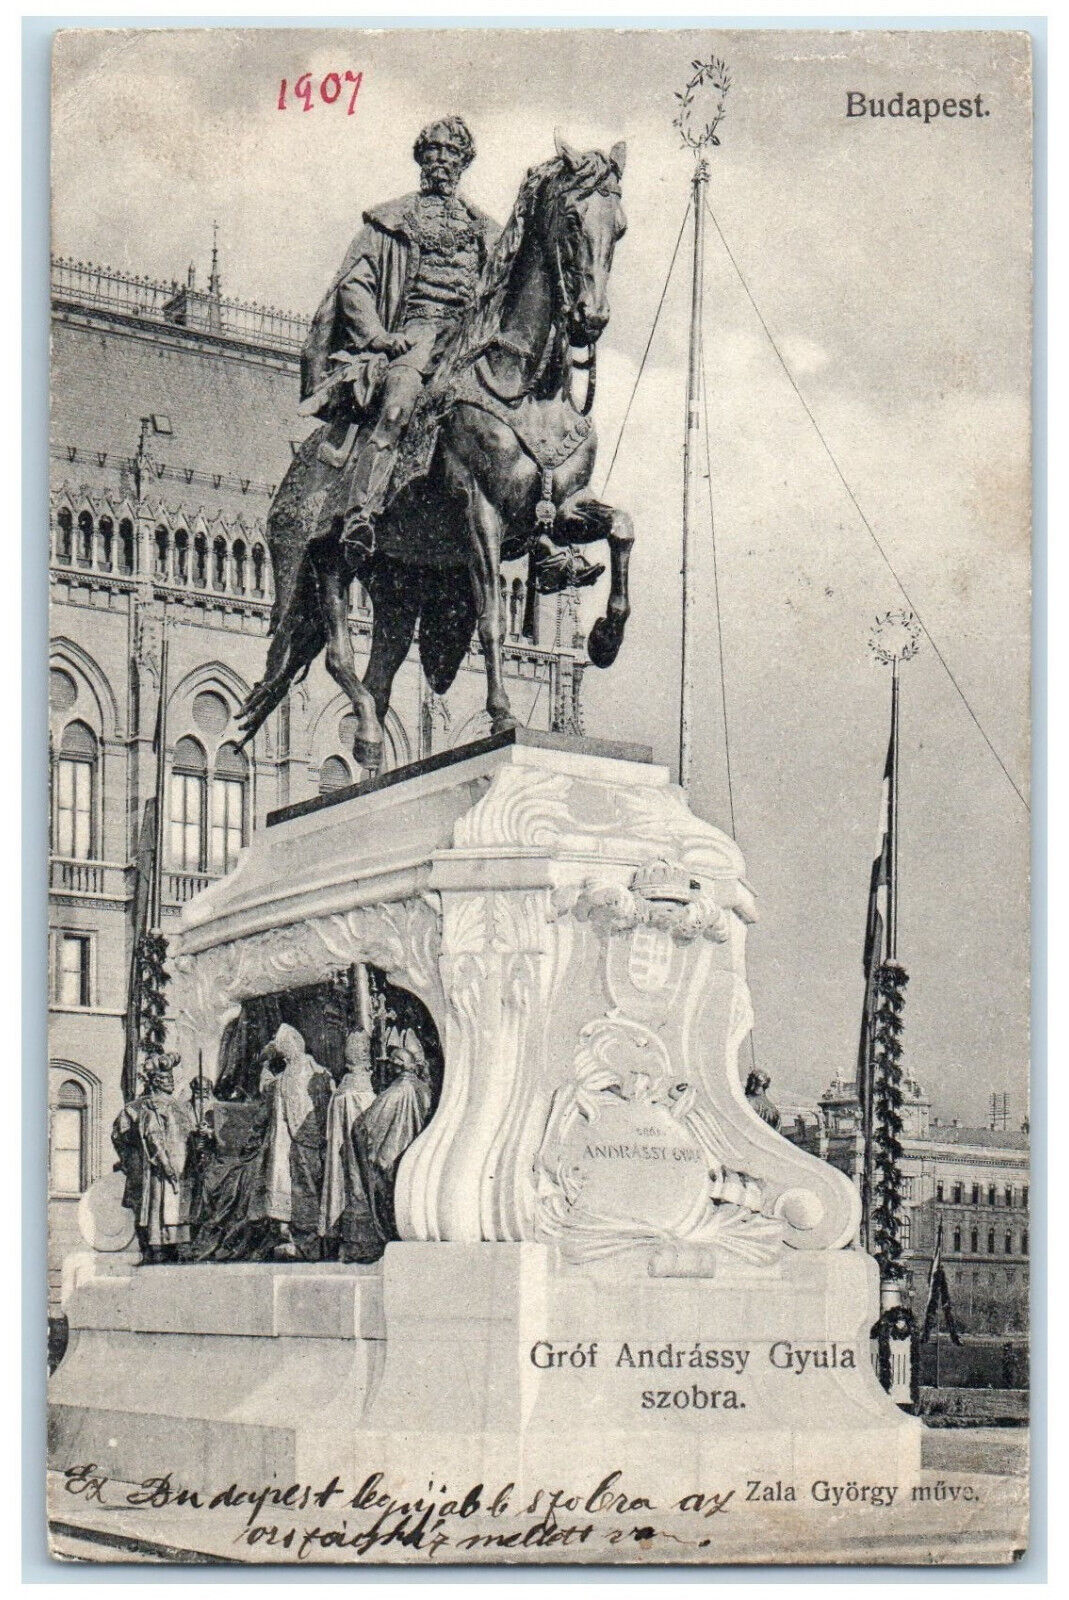 1907 View of Statue of Gyula Grof Andrassy Hungary Posted Antique Postcard